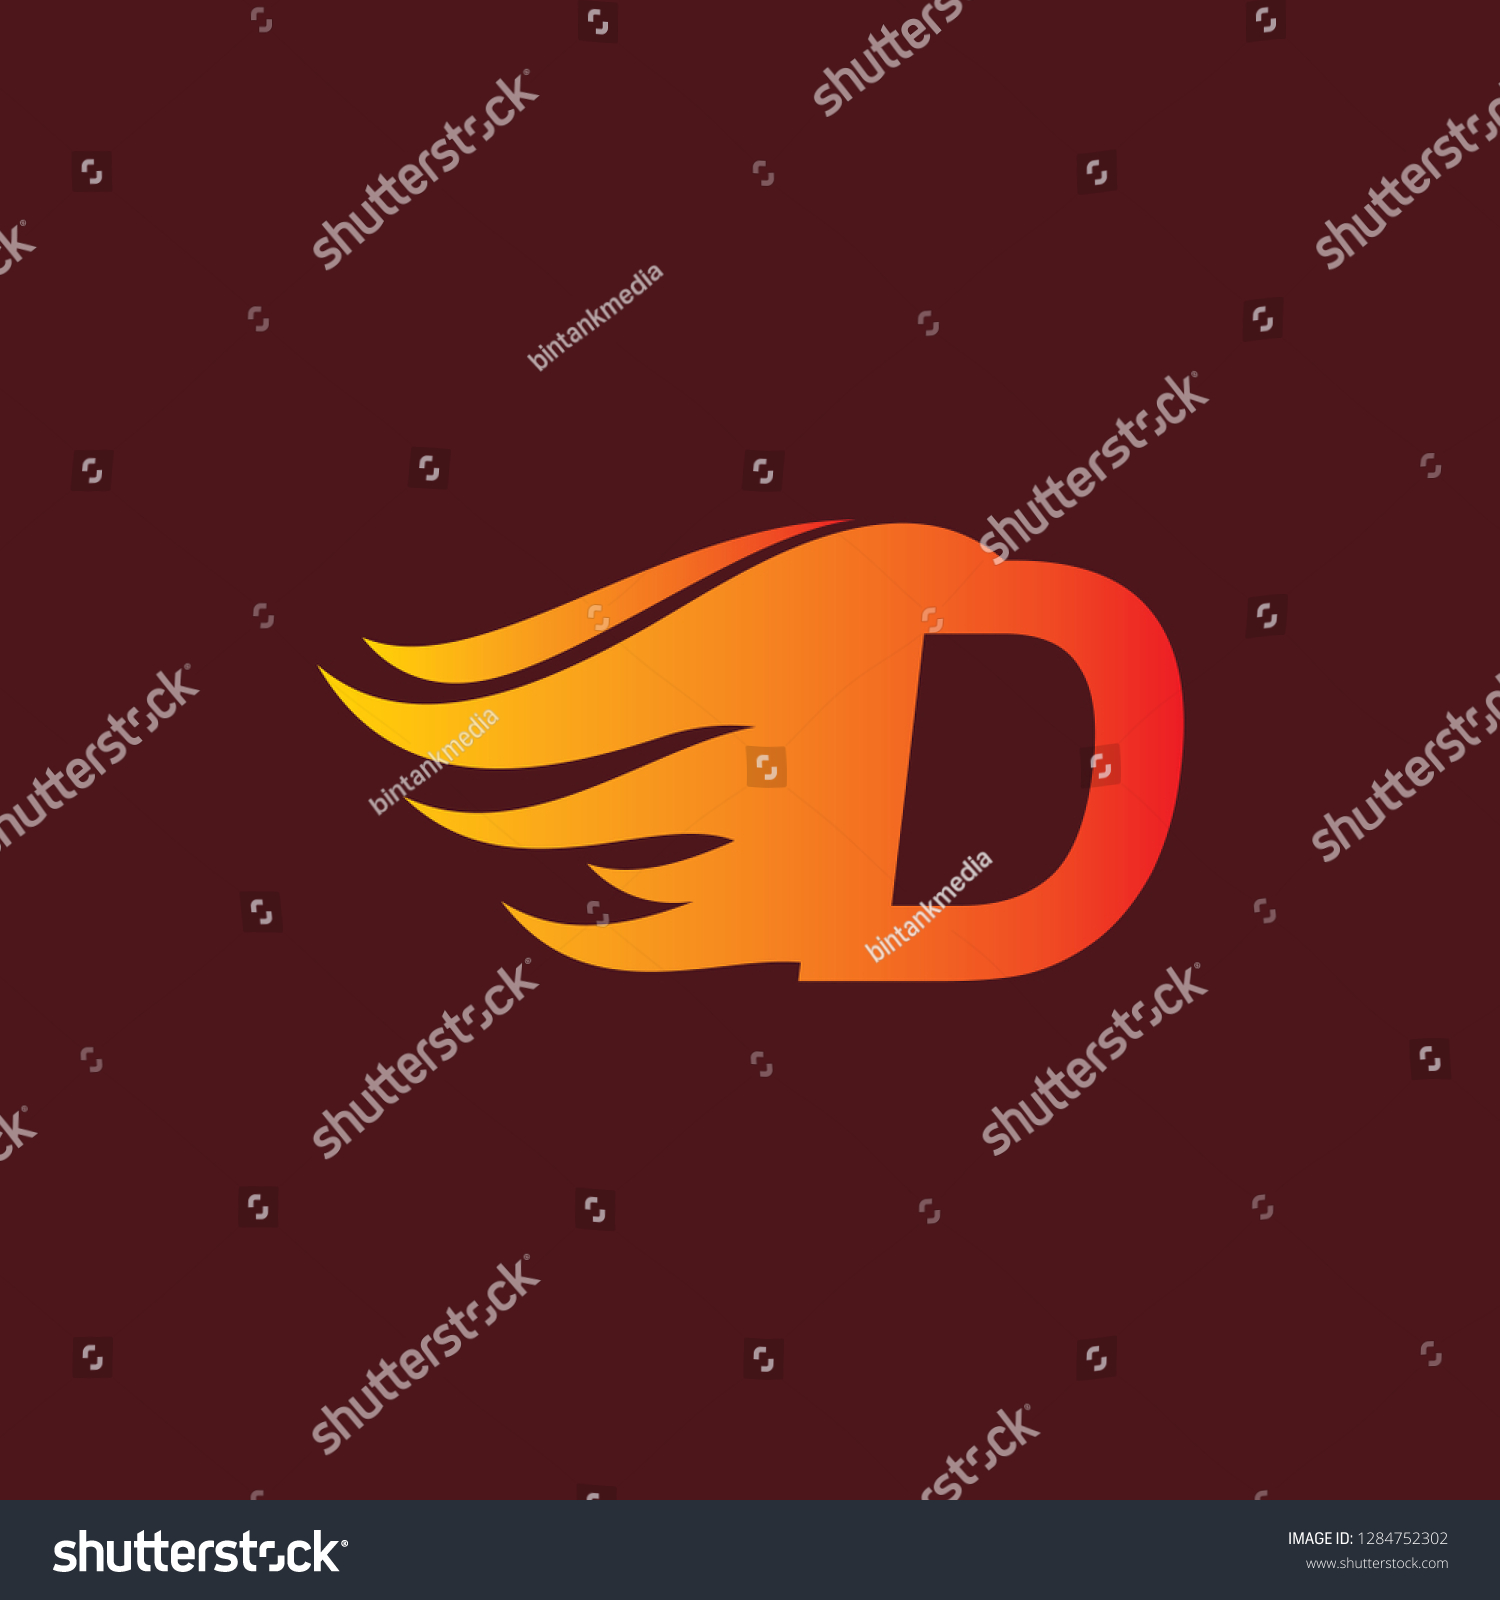 D Letter Fire Flame Logo Design Stock Vector (Royalty Free) 1284752302